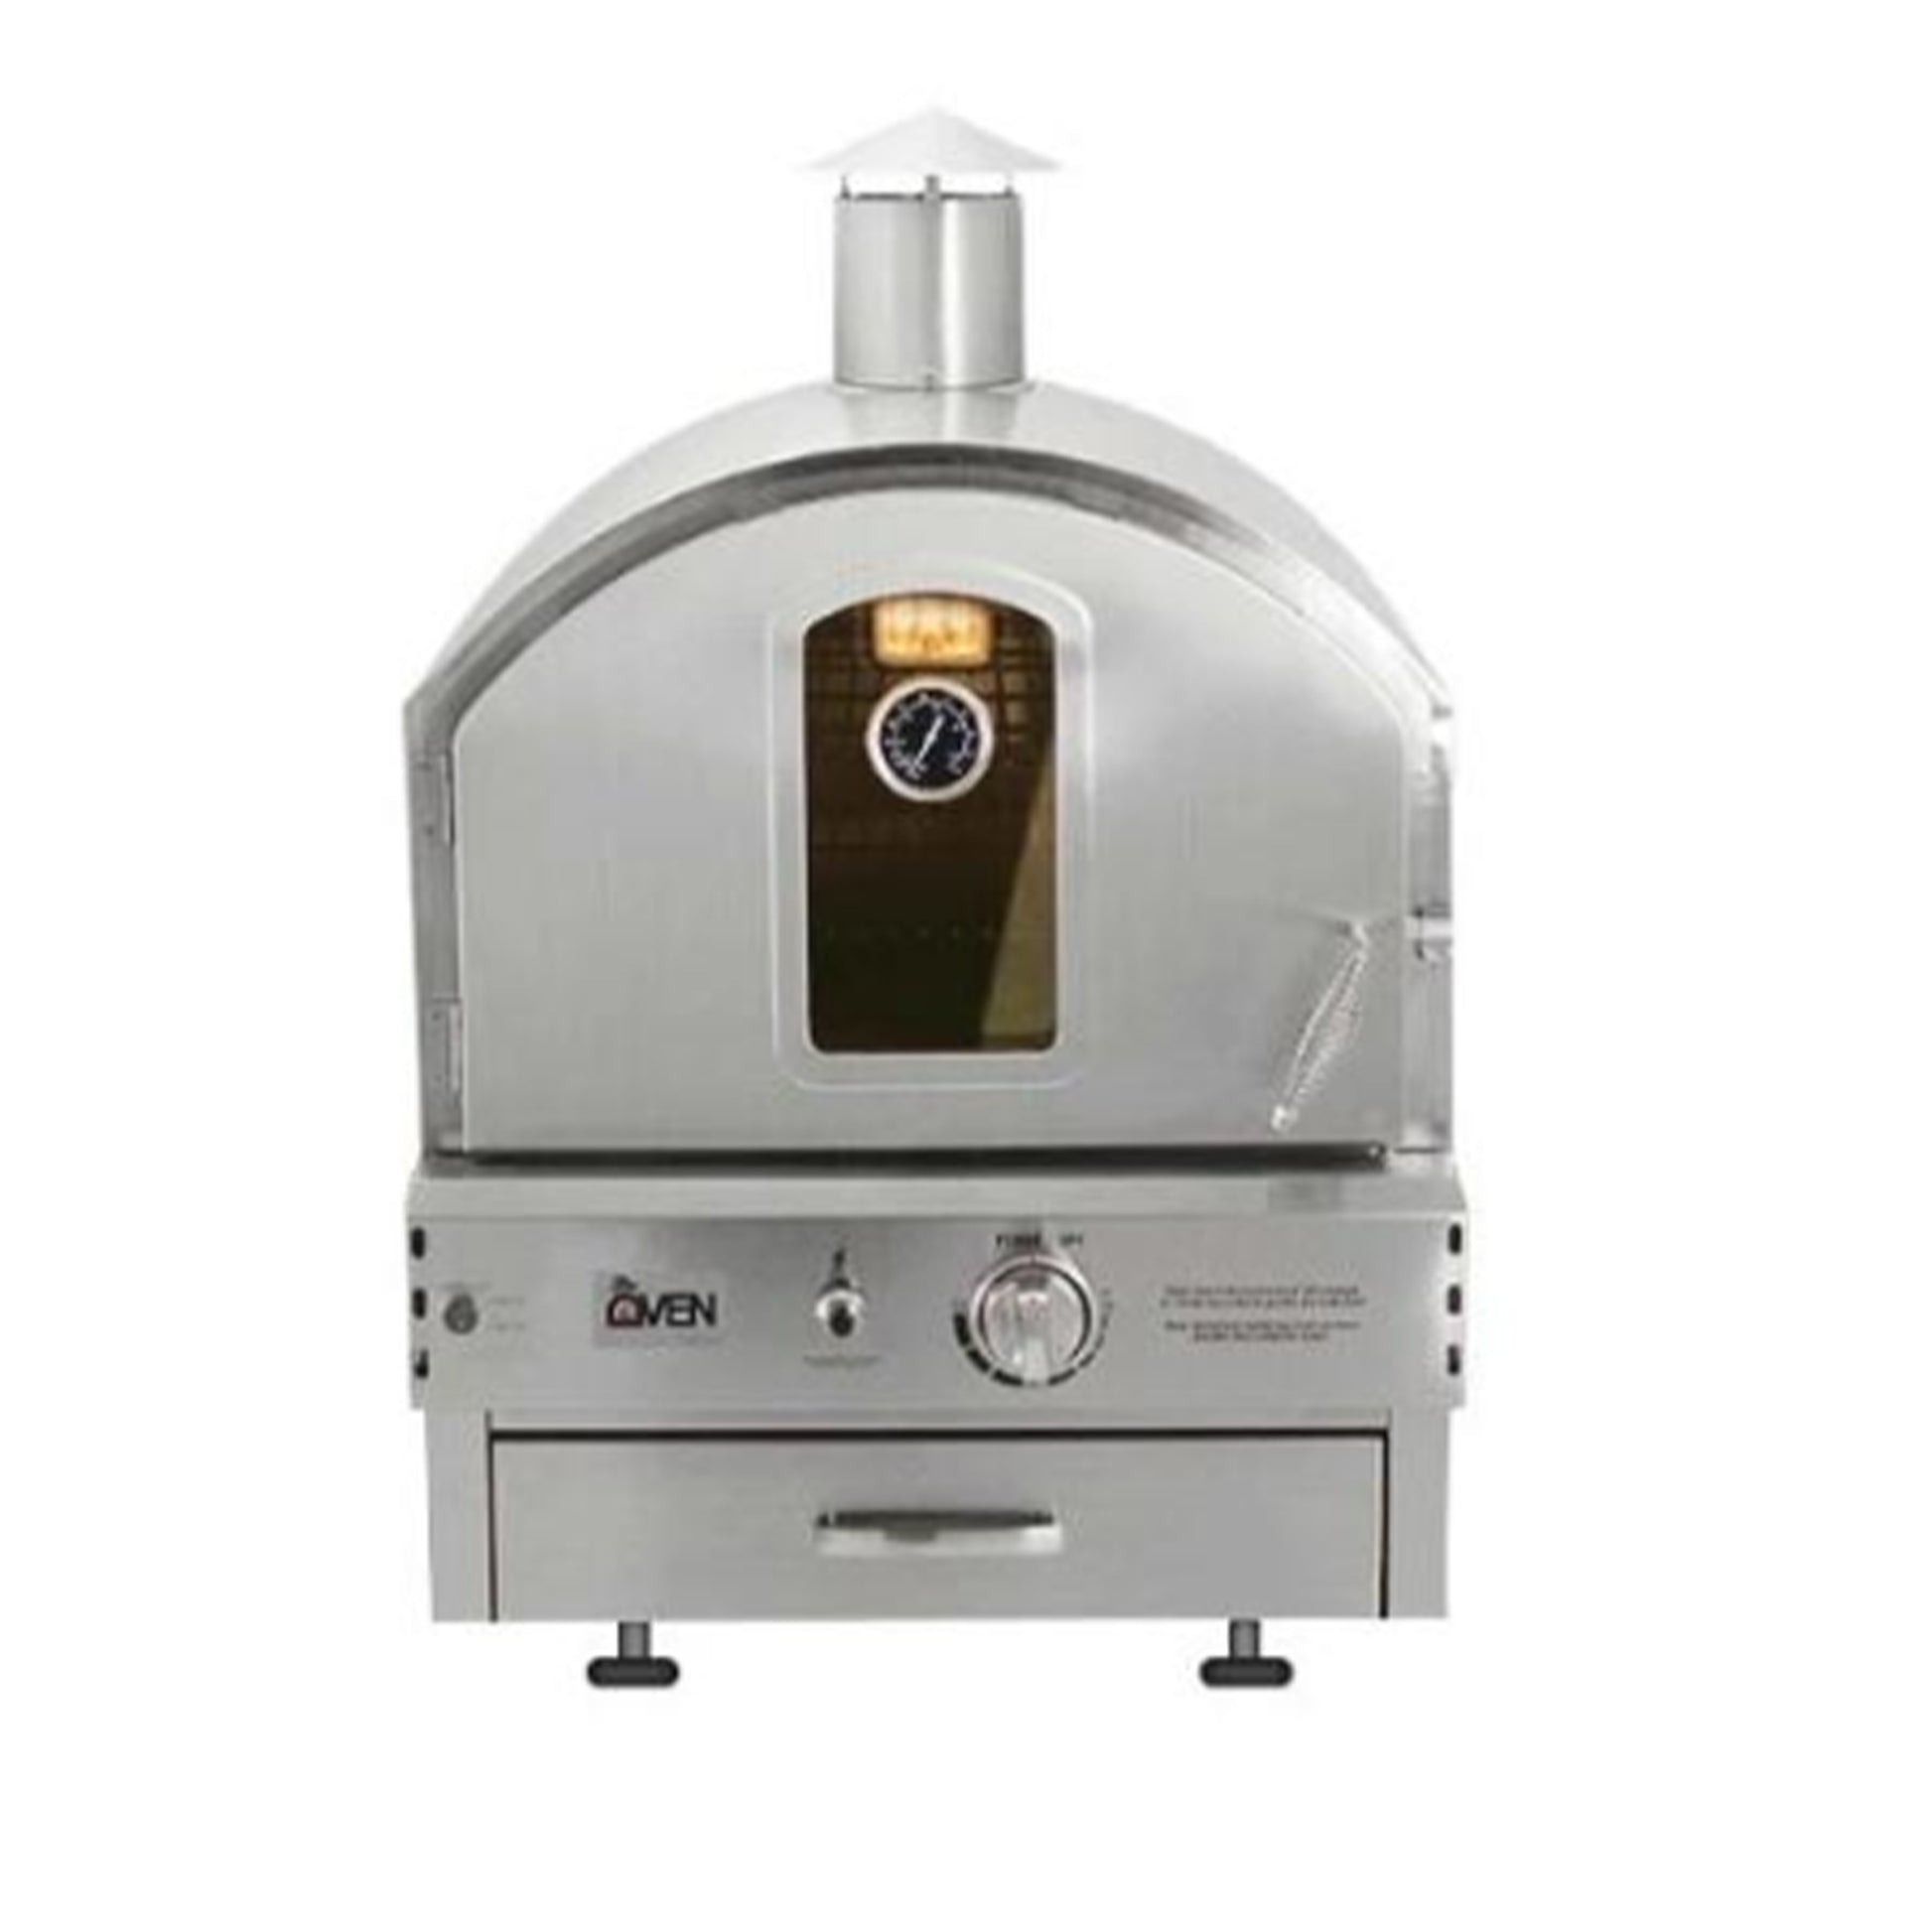 The Countertop Pizza and Appetizer Cooker @